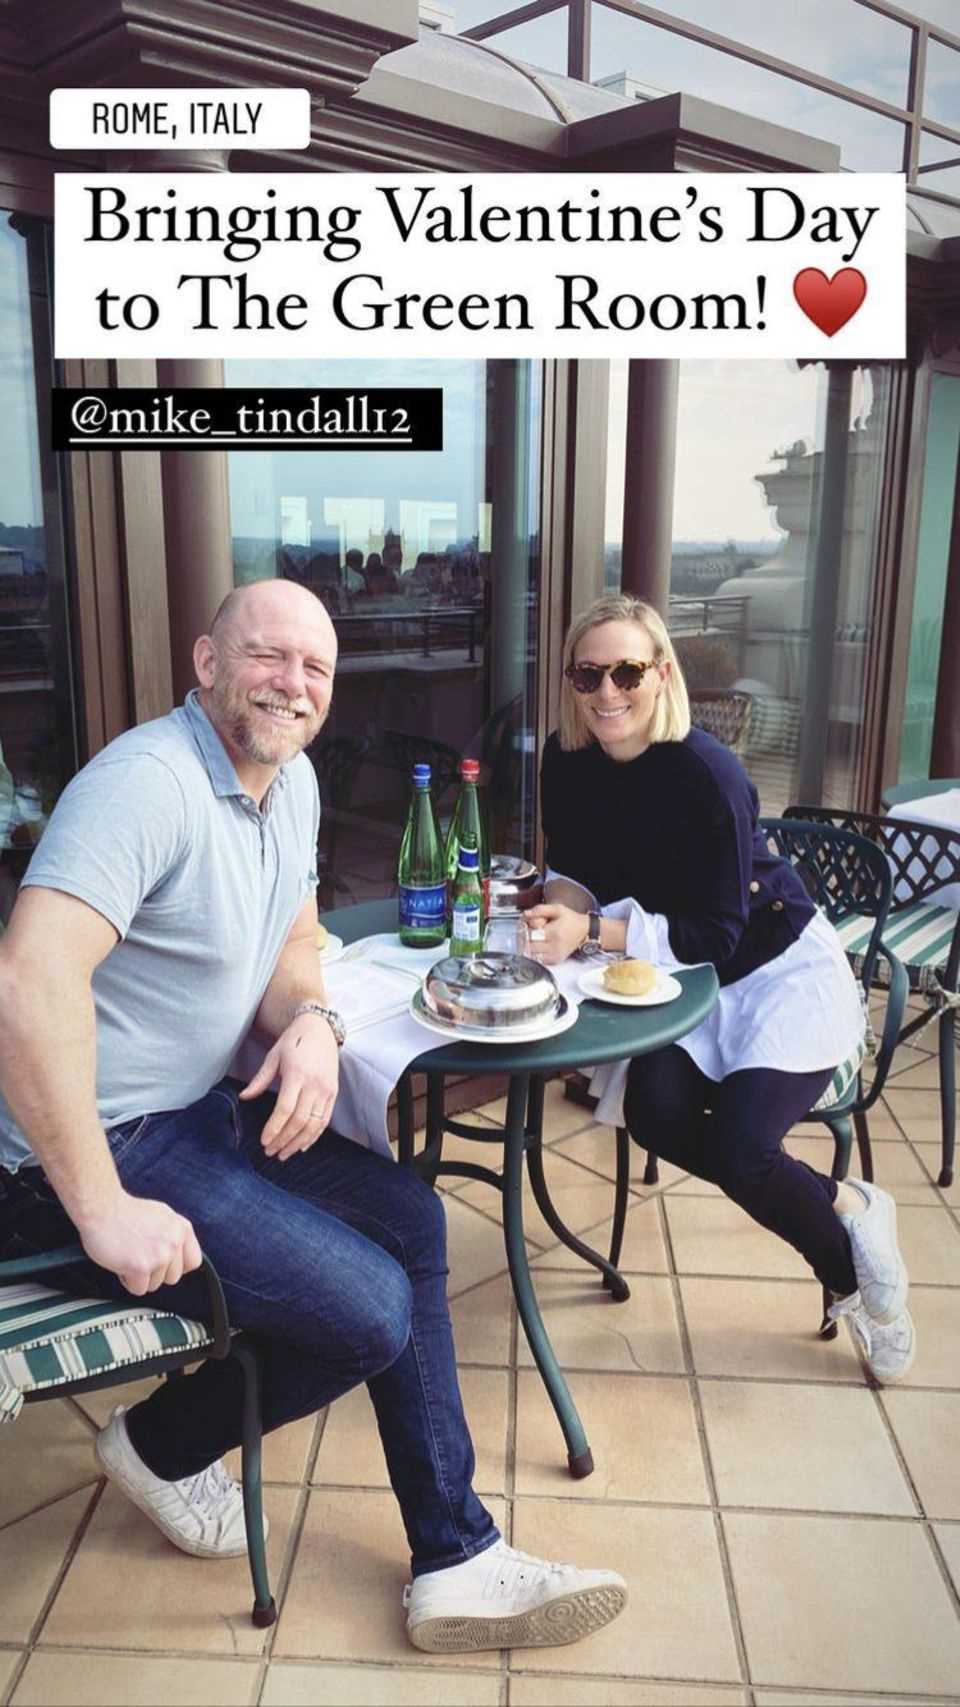 Mike and Zara Tindall at The Green Room in Rome